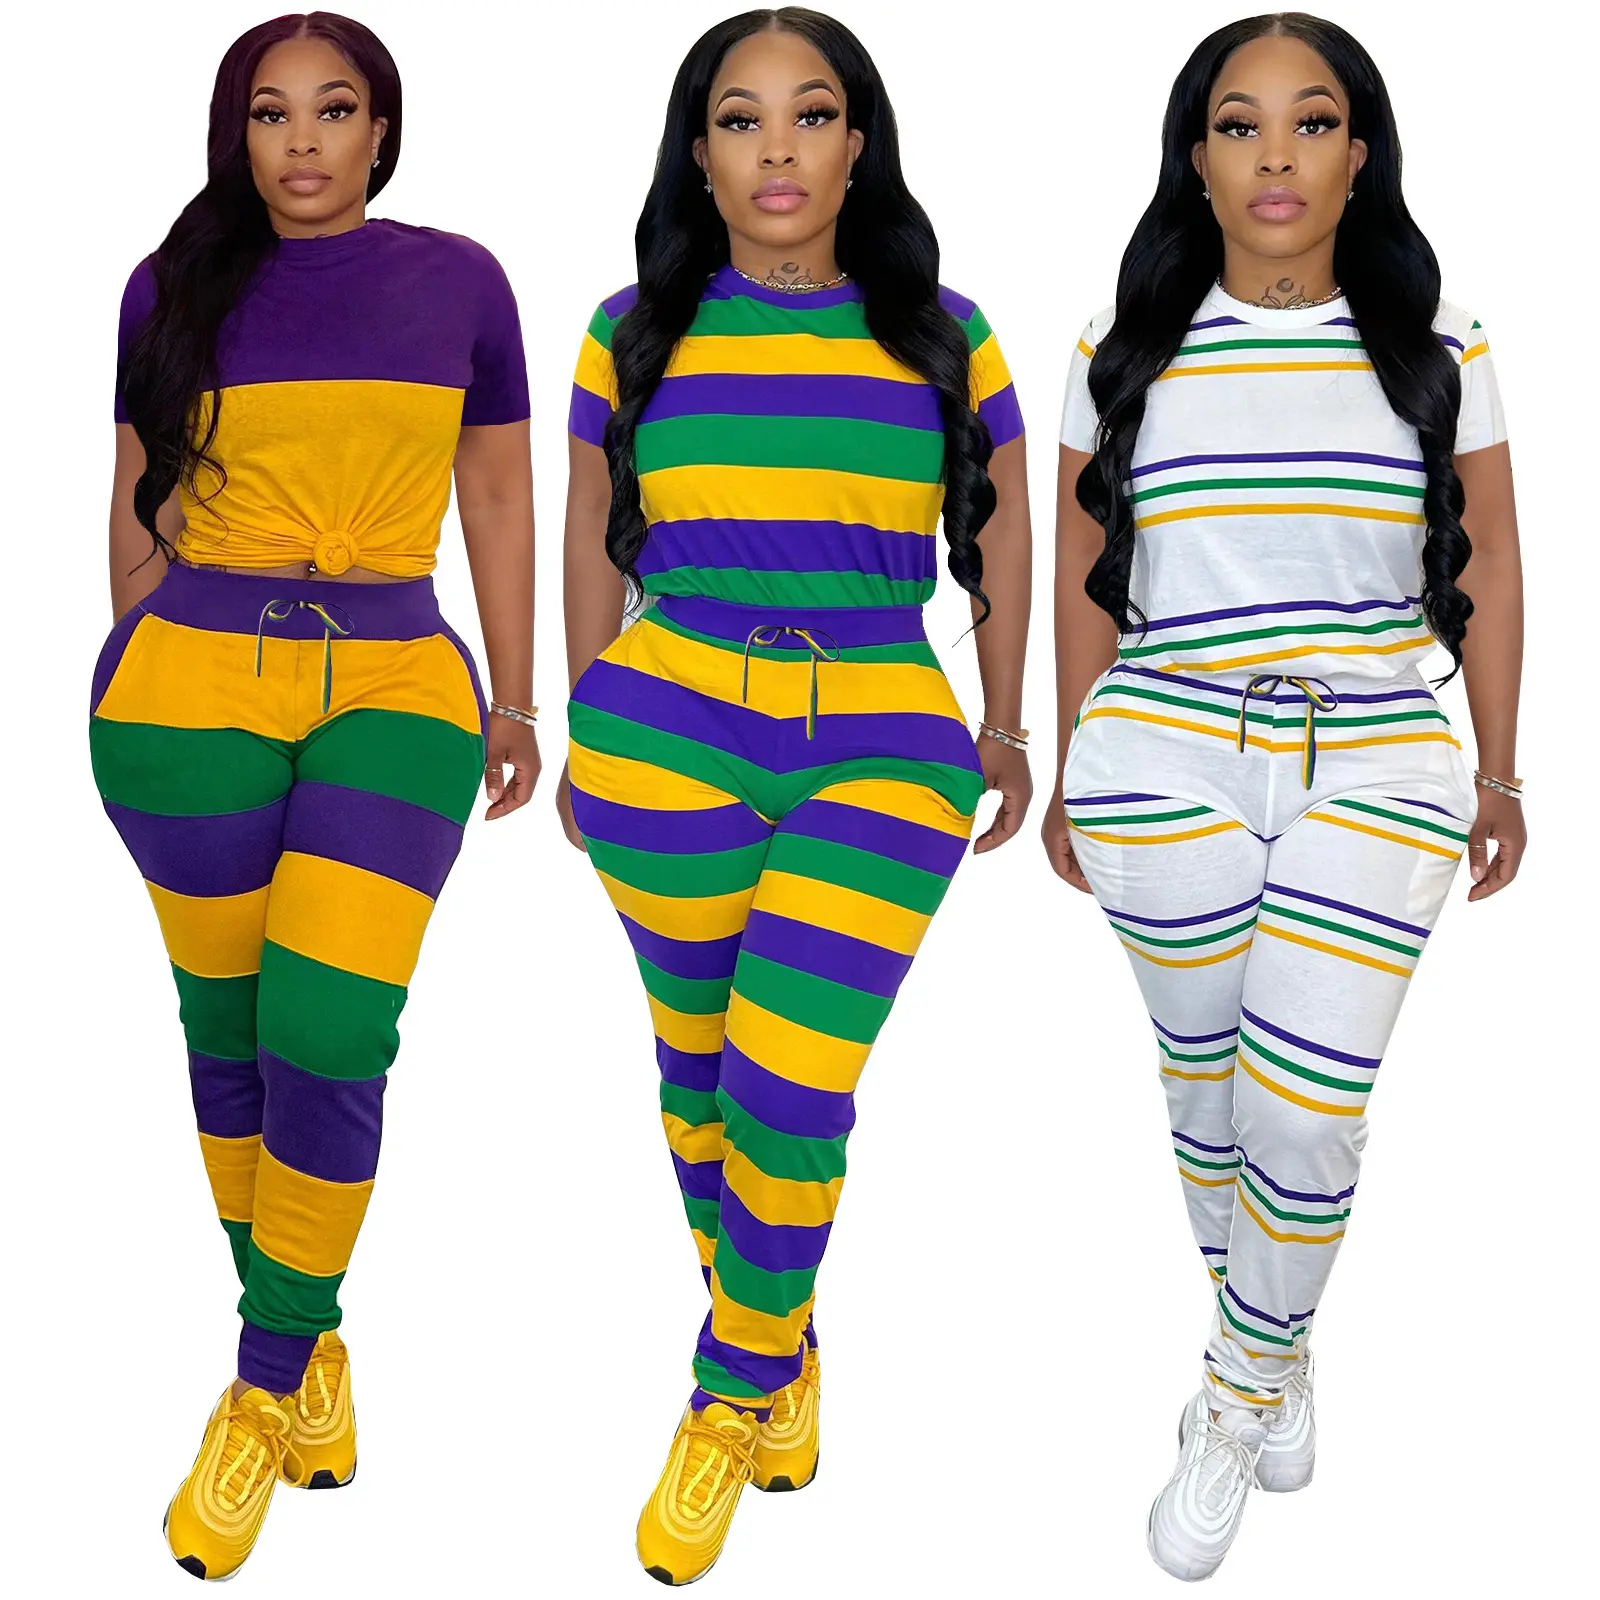 Mardi Gras Set Women Striped T-shirt with Pants Cotton Sweat-absorbing Round Neck Short Sleeve Top Leggings 2pcs Holiday Outfits